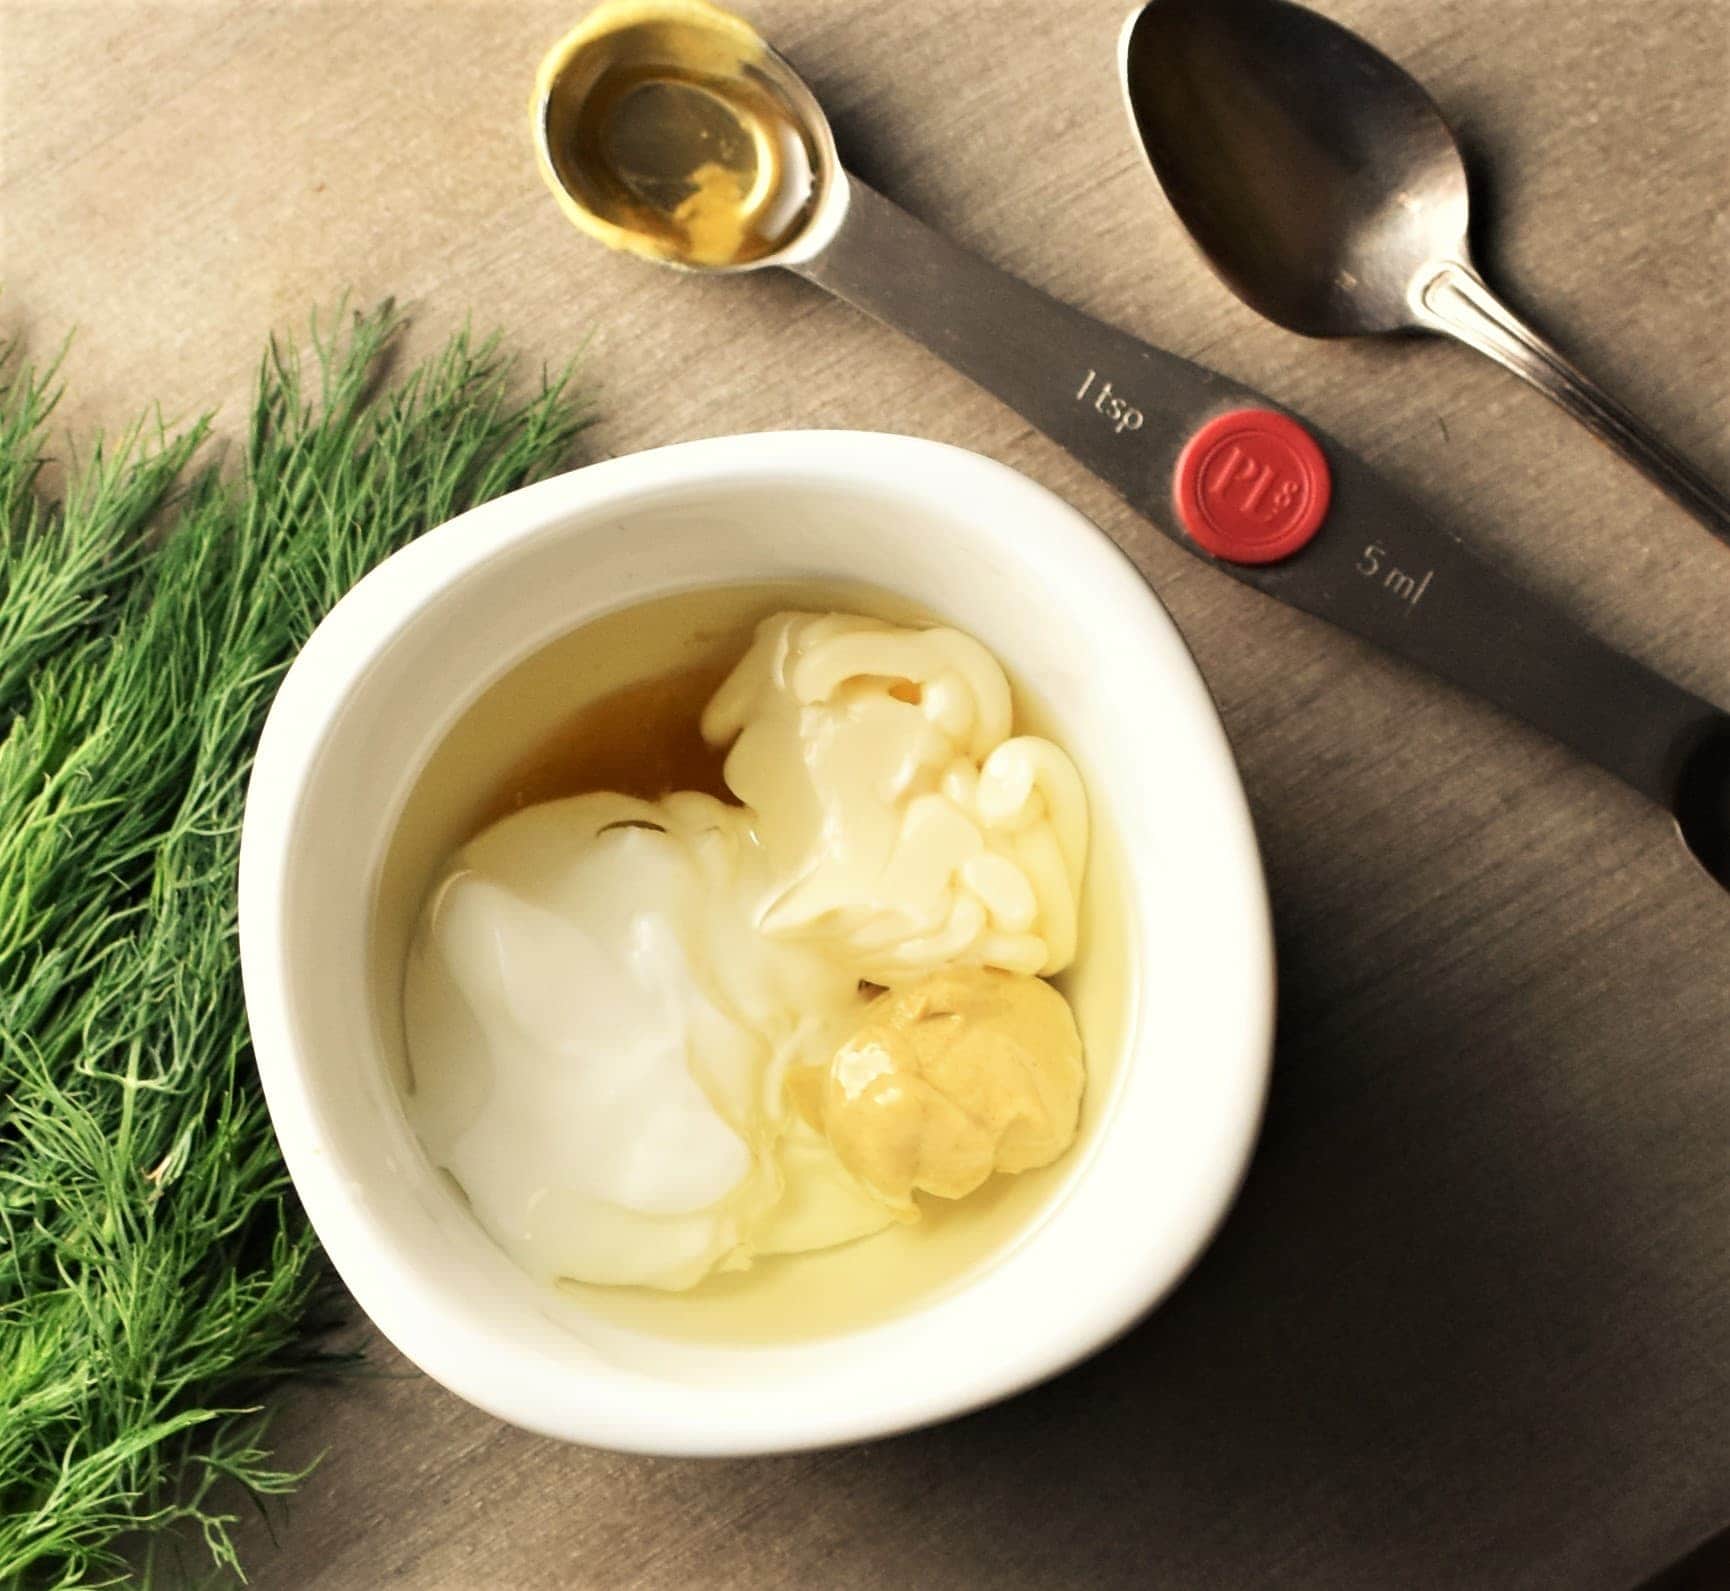 Yogurt and mustard dressing ingredients in white dish, with dill and spoons in background.